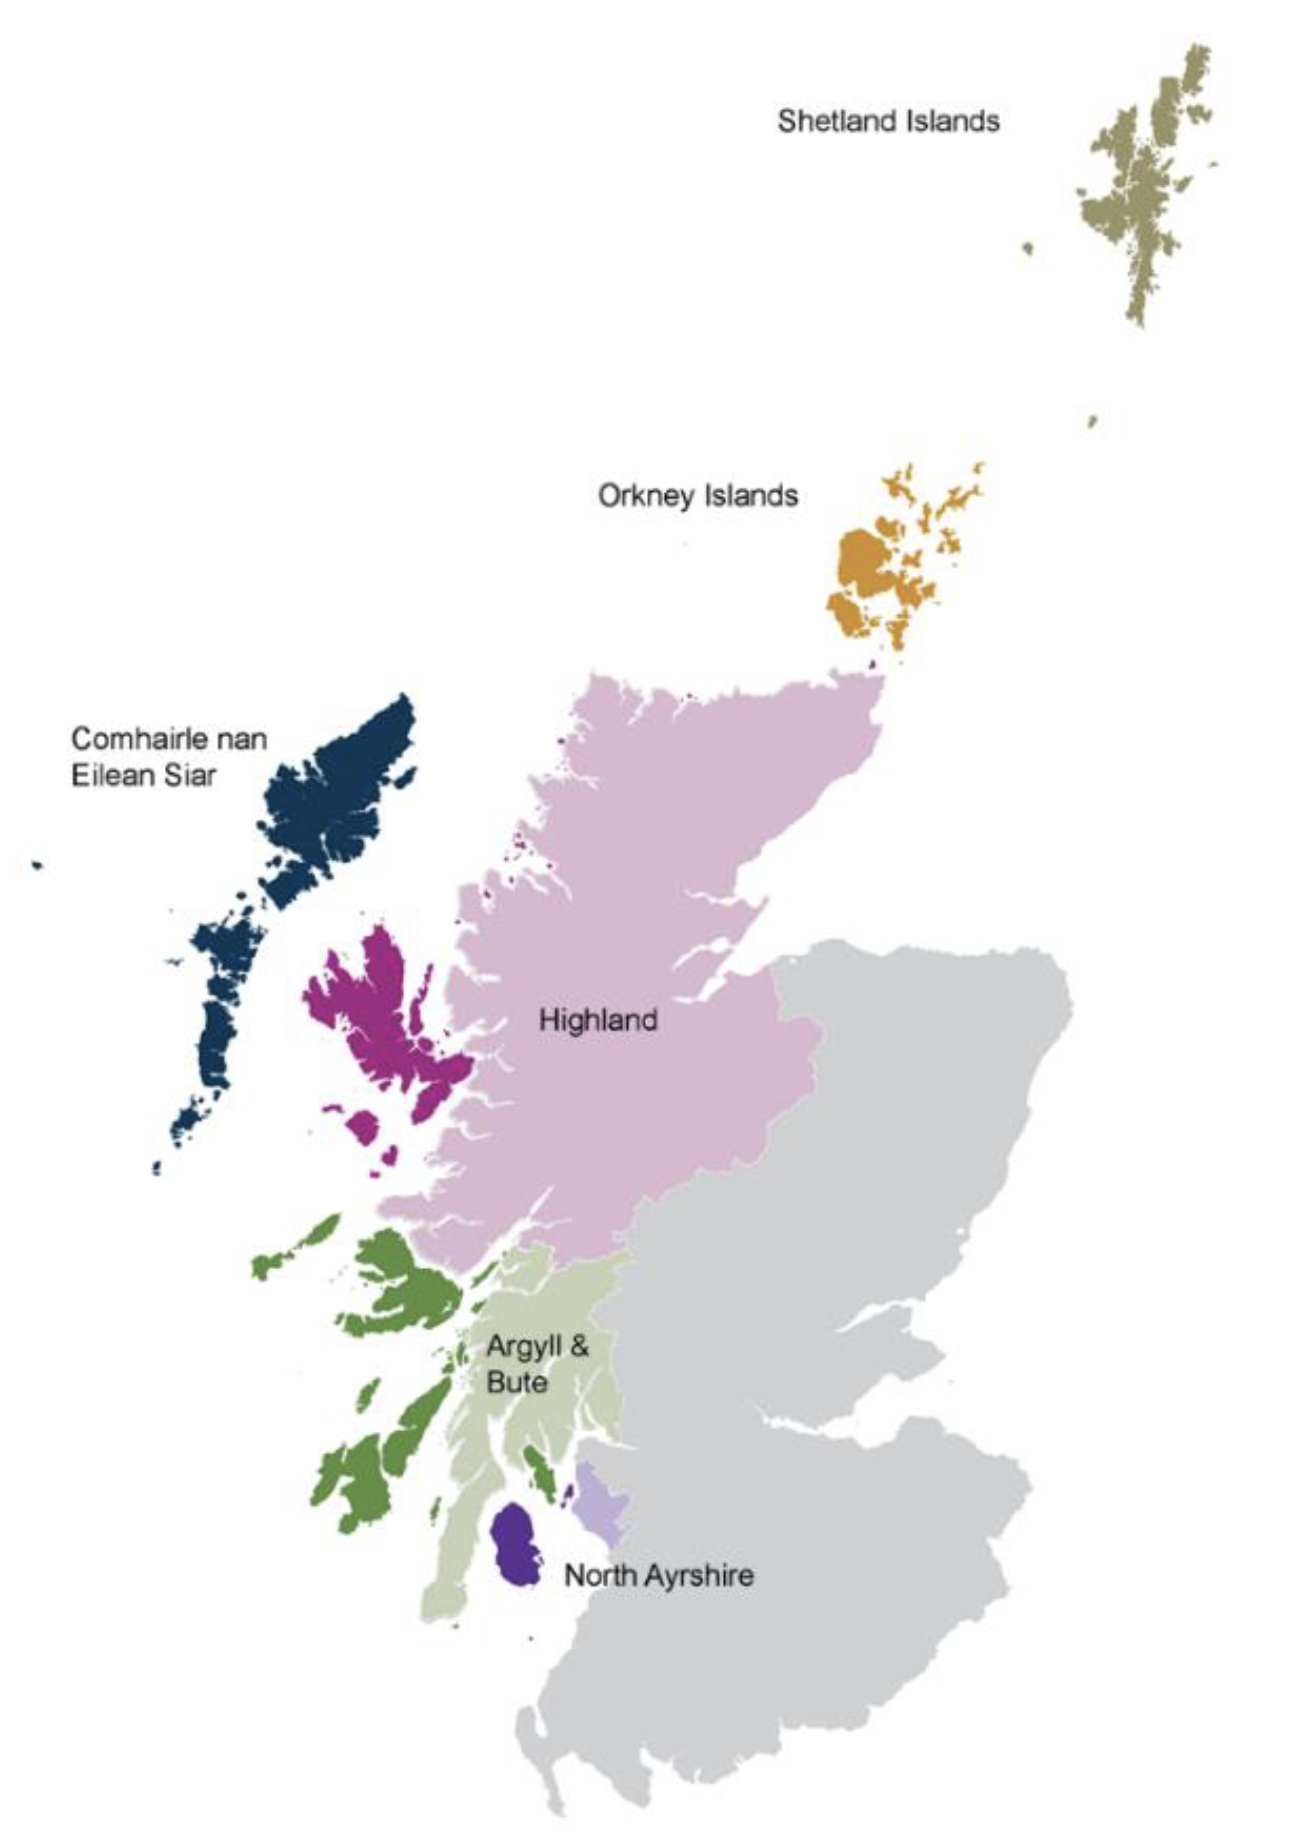 Map of Scotland highlighting the 6 local authorities erpresenting Island Communities - Argyll and Bute Council, Western Isles, Highland Council, North Ayrshire Council, Orkney Islands Council and Shetland Islands Council.